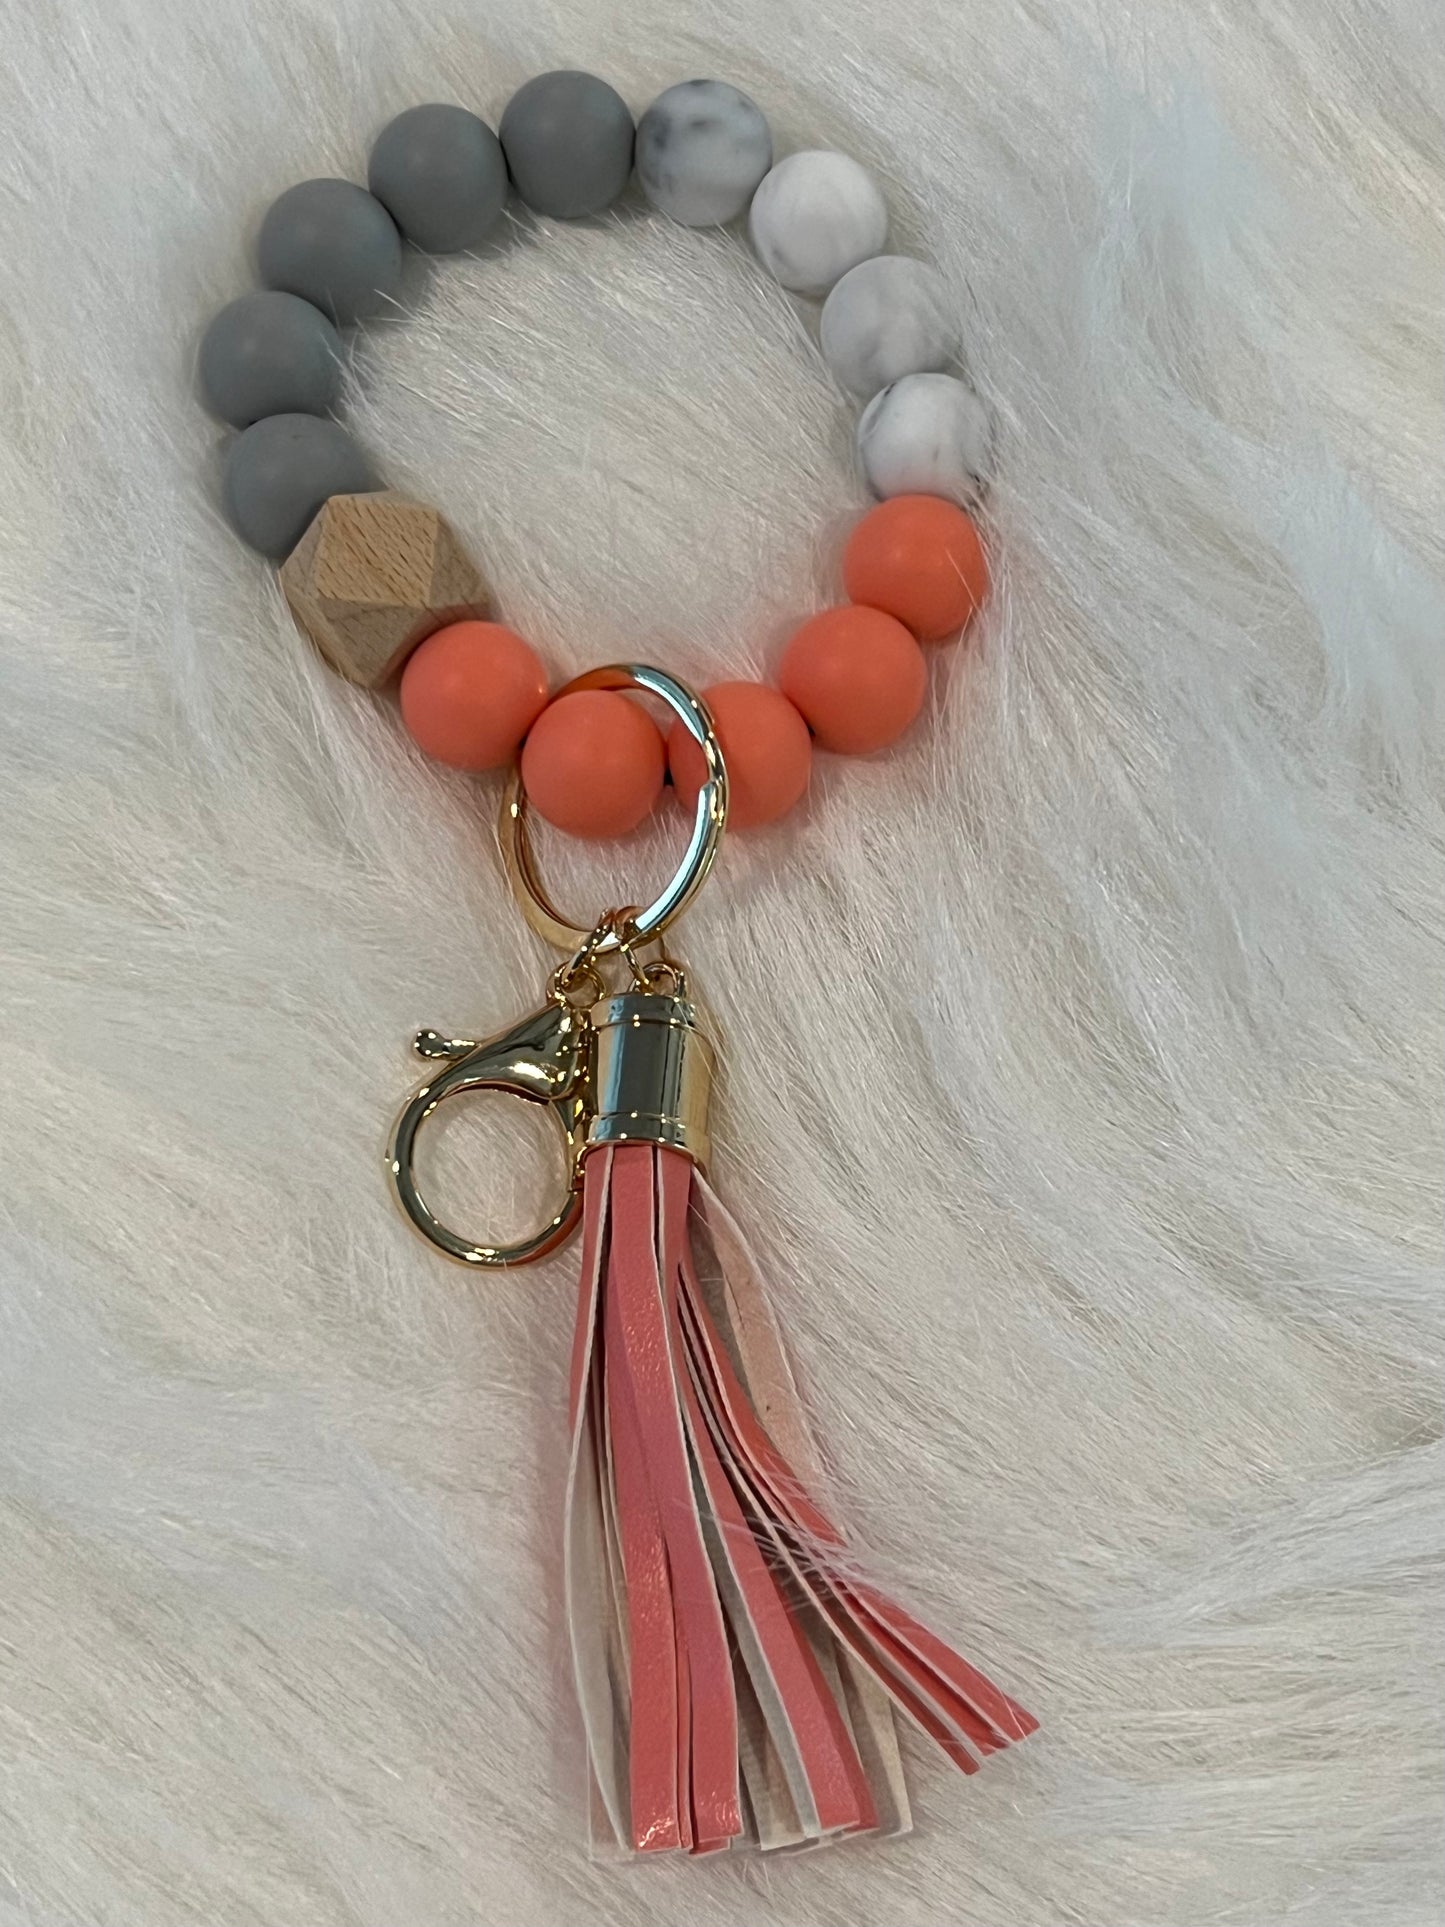 Bead Bracelet and Dangle MAMA Keychain | Sublimation Disc | Ships from TN